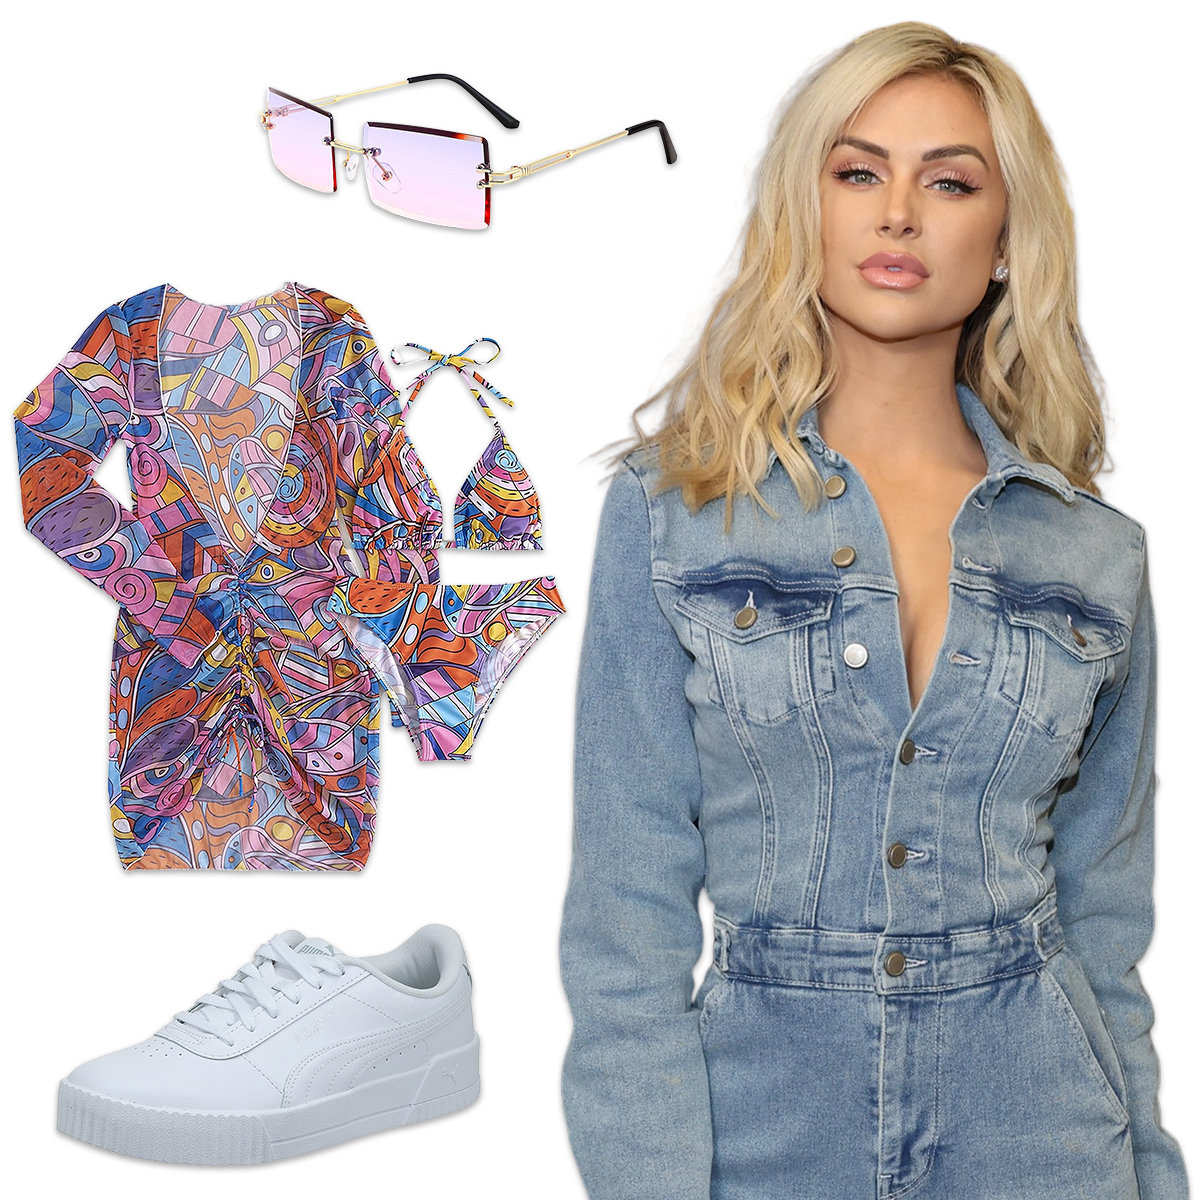 VPR's Lala Kent's  Must-Haves Include a Top-Rated $4 Item